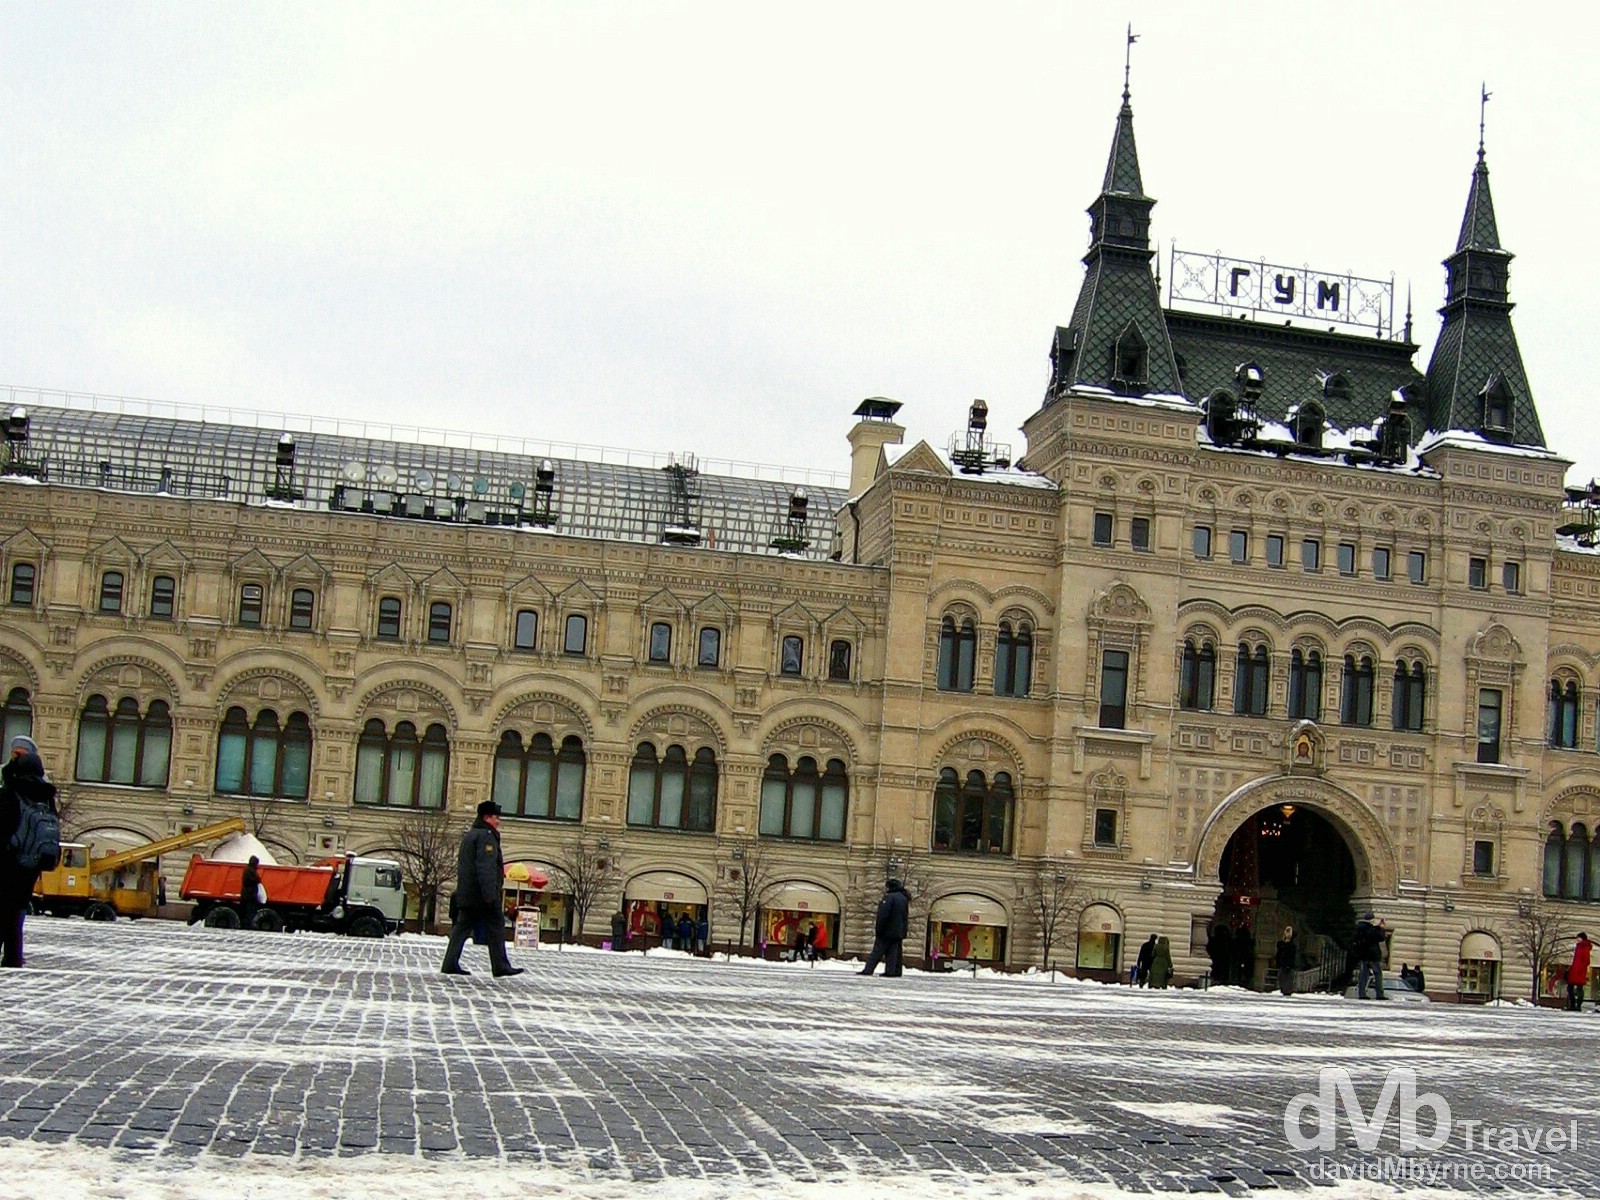 The GUM Department Store as seen from Red Square, Moscow, Russia. February 26, 2006.